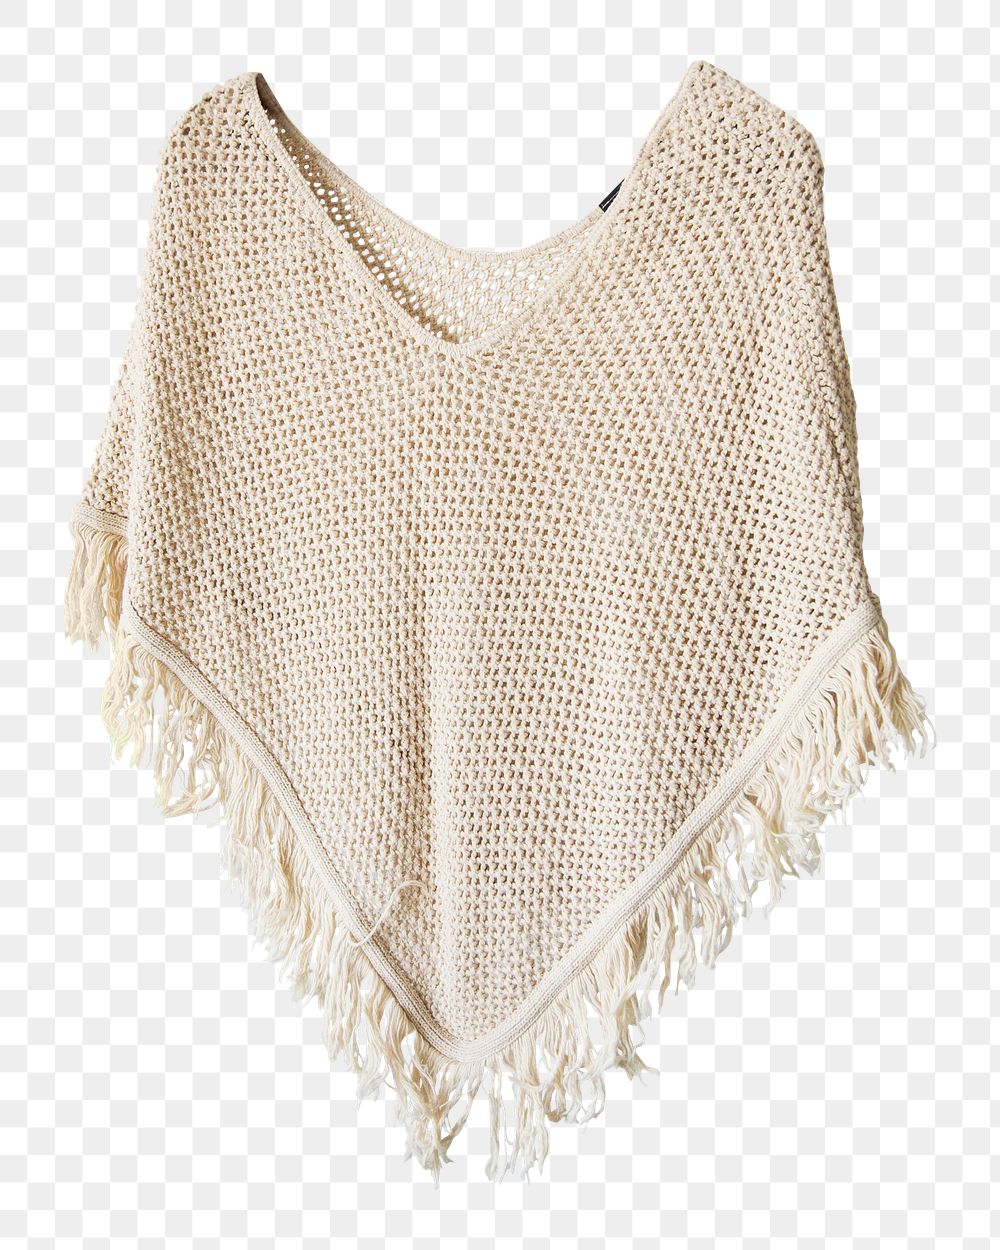 Knitted poncho clothing png sticker, transparent background